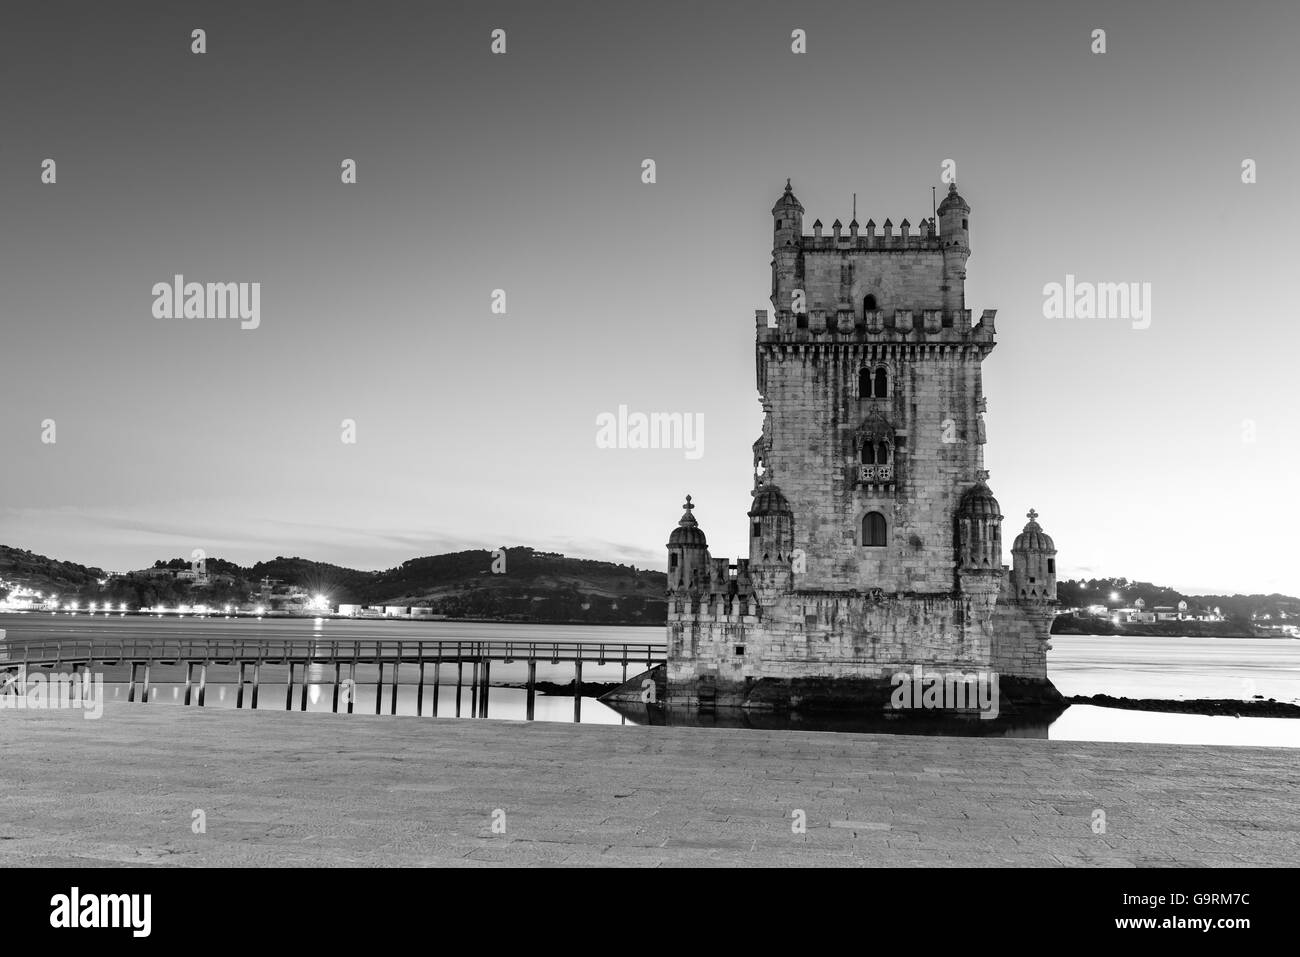 Lisbon, Portugal at Belem Tower on the Tagus River. Stock Photo